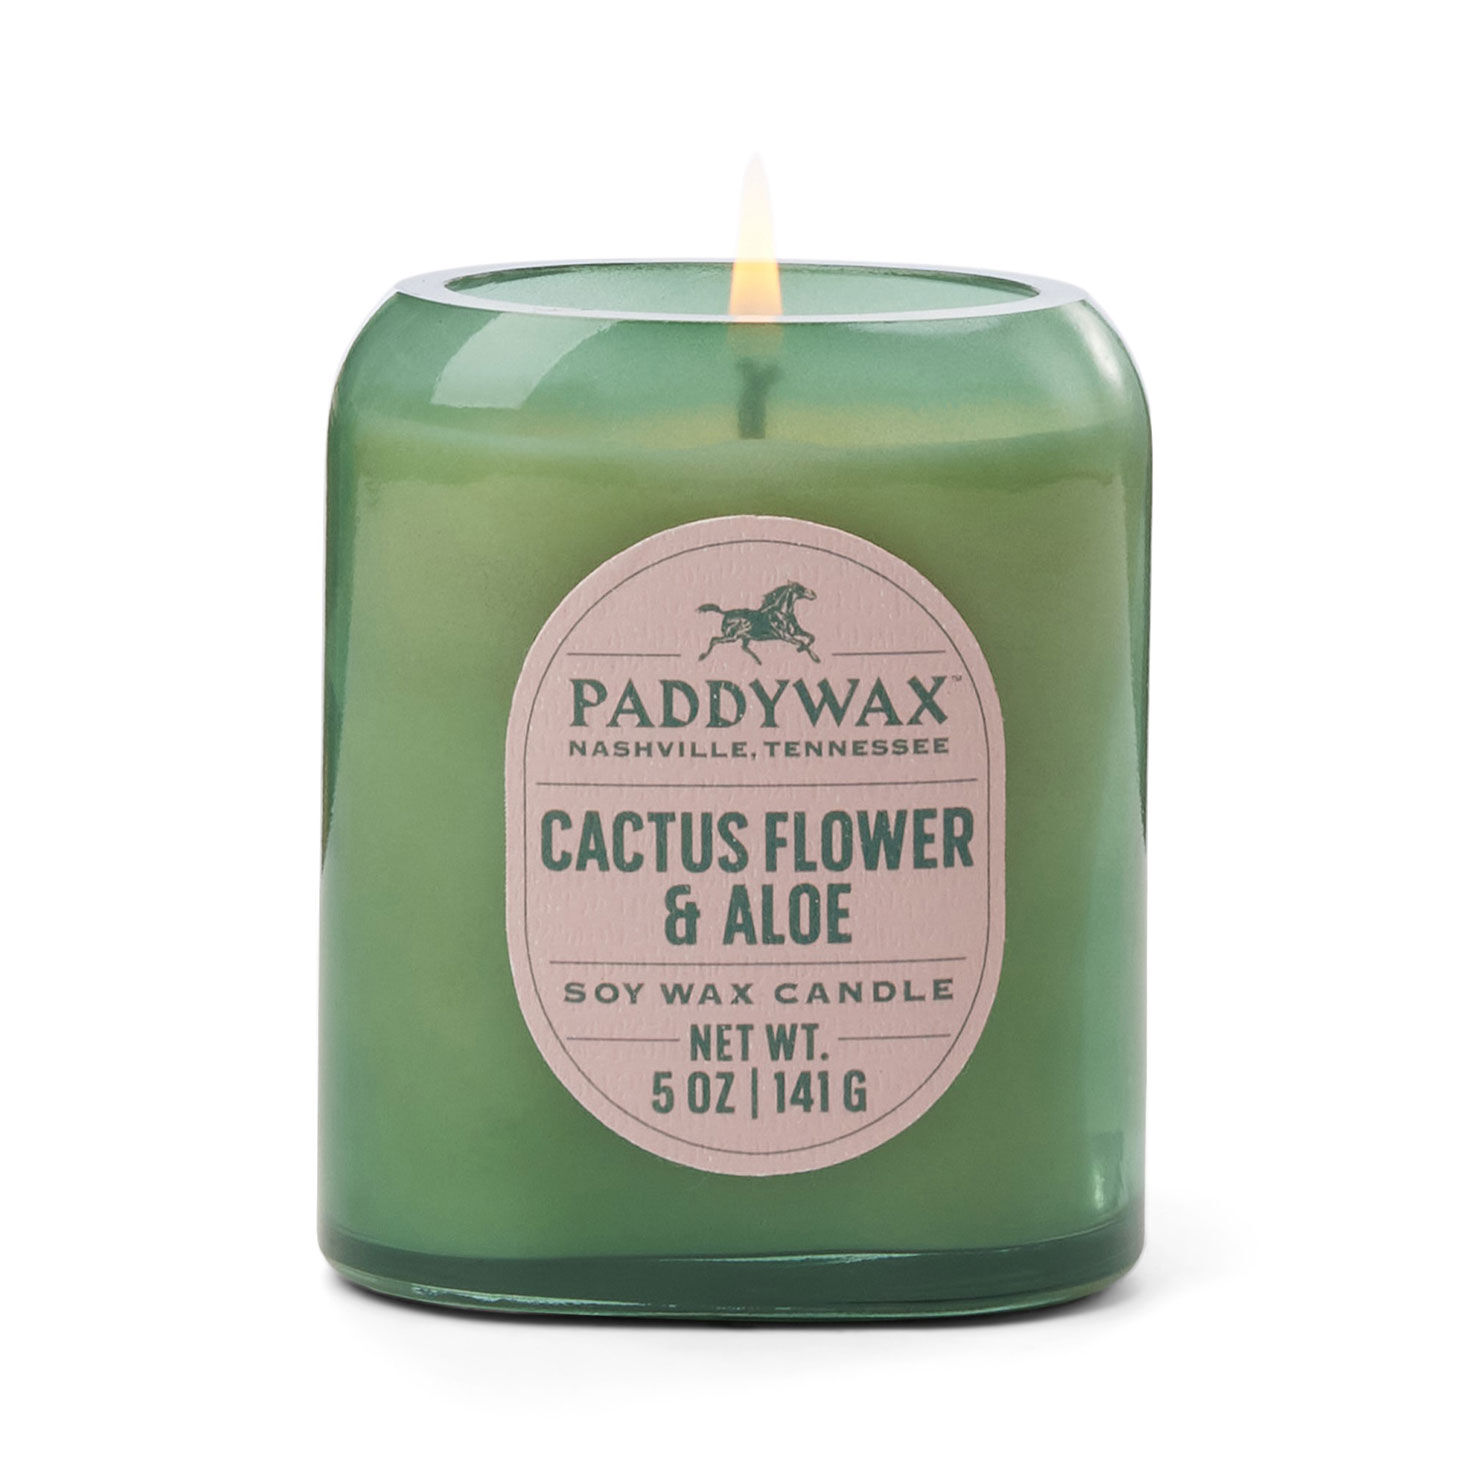 Paddywax Cactus Flower and Aloe Vista Candle, 5 oz. for only USD 18.99 | Hallmark